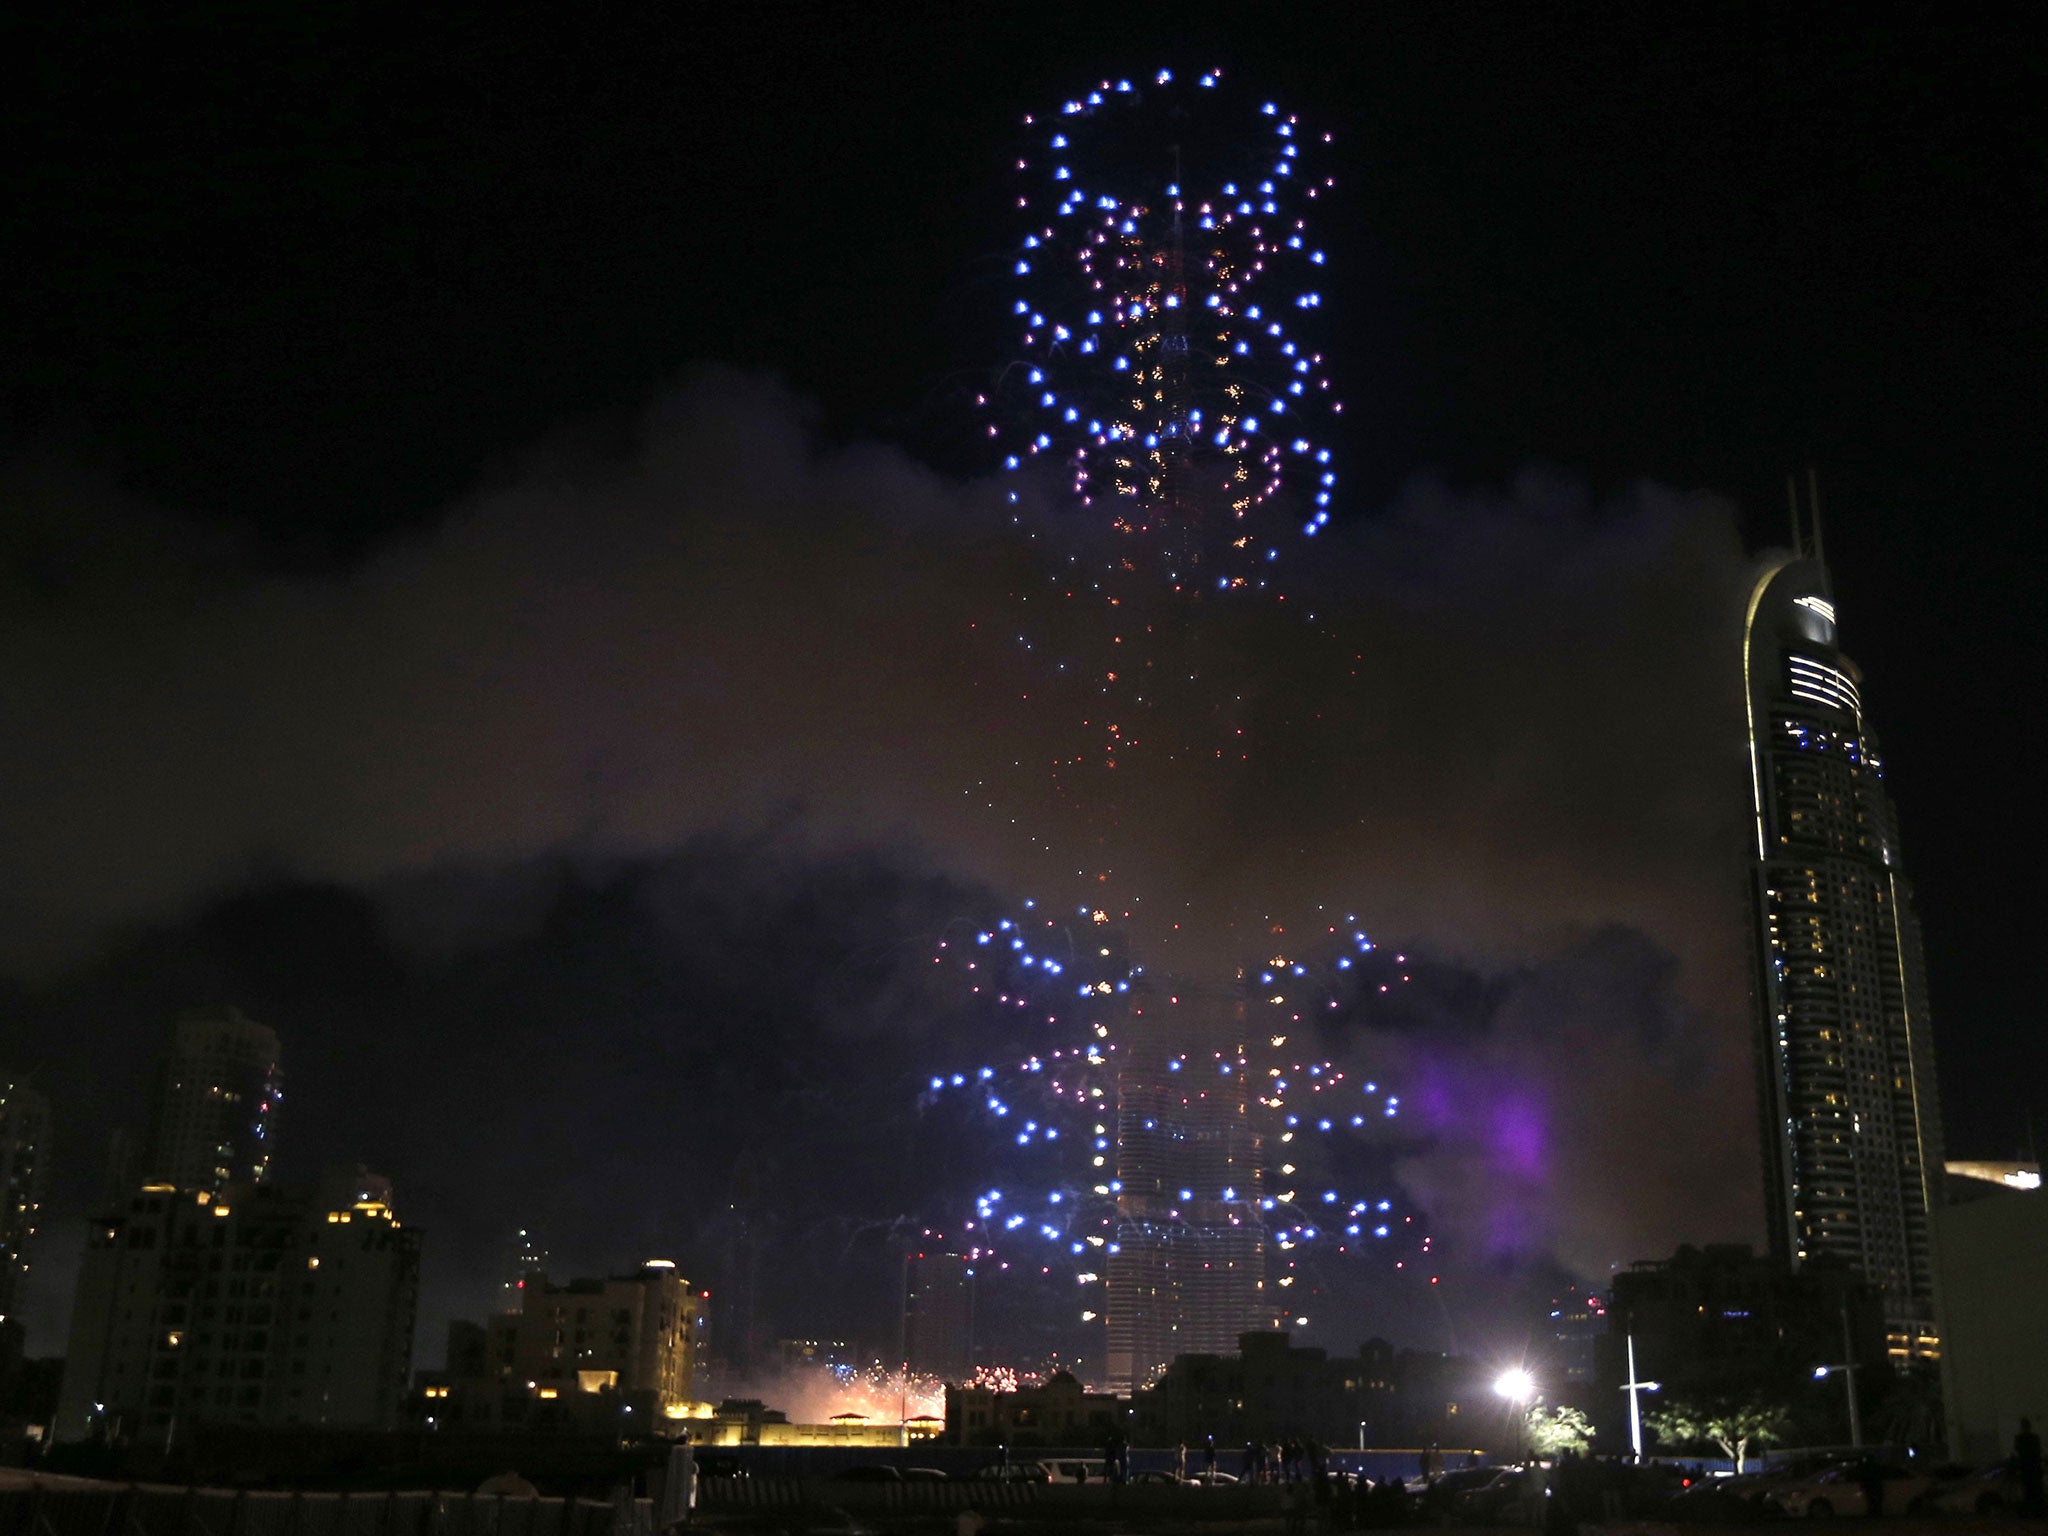 Fireworks explode over Dubai's Burj Khalifa, the world's tallest tower, close to where a huge fire in a luxury hotel injured more than a dozen people hours earlier